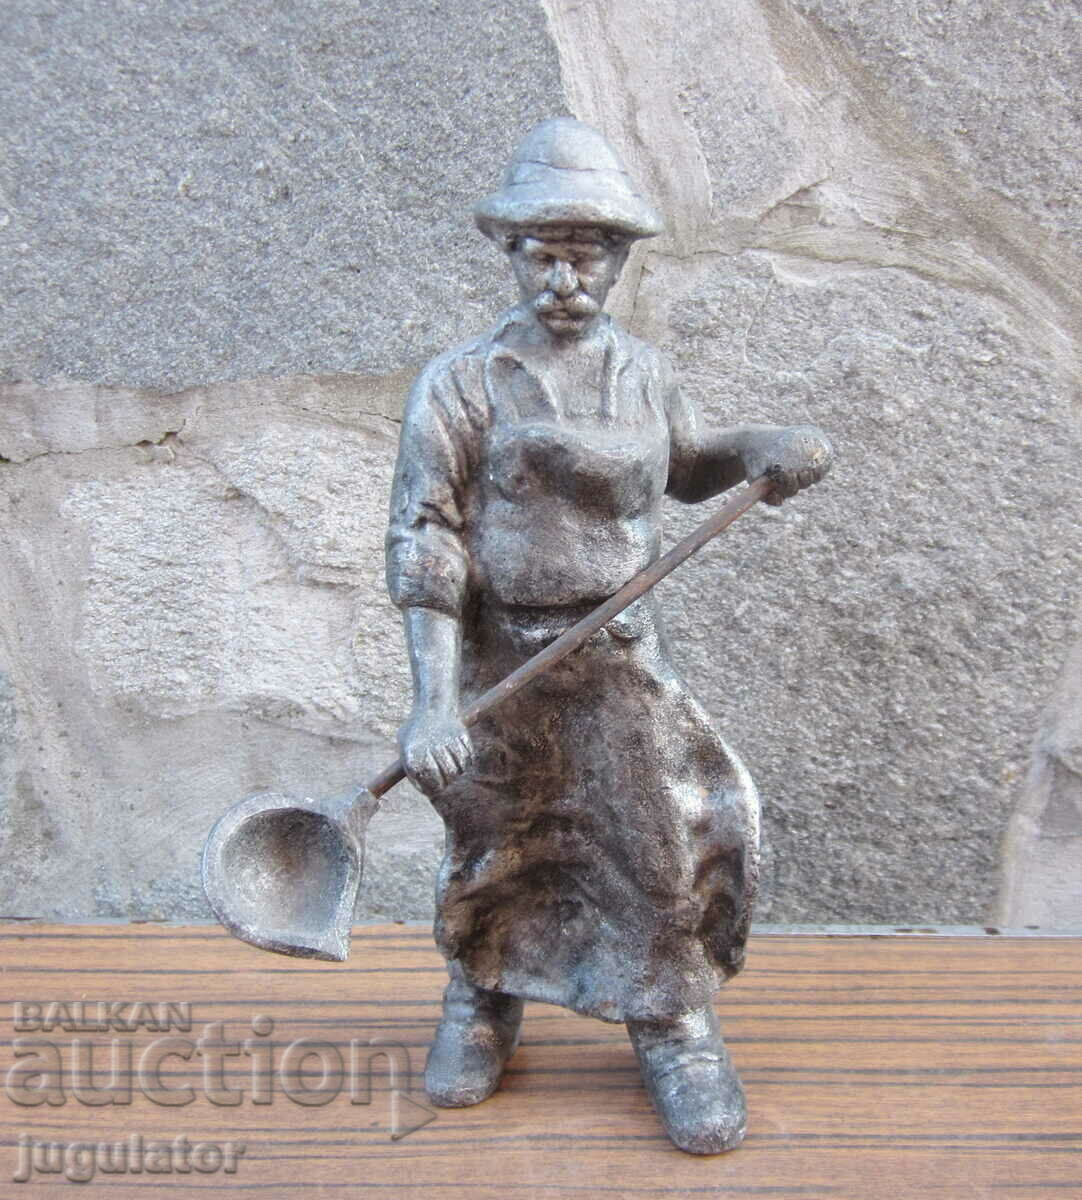 old Russian heavy metal figure figurine of a foundry